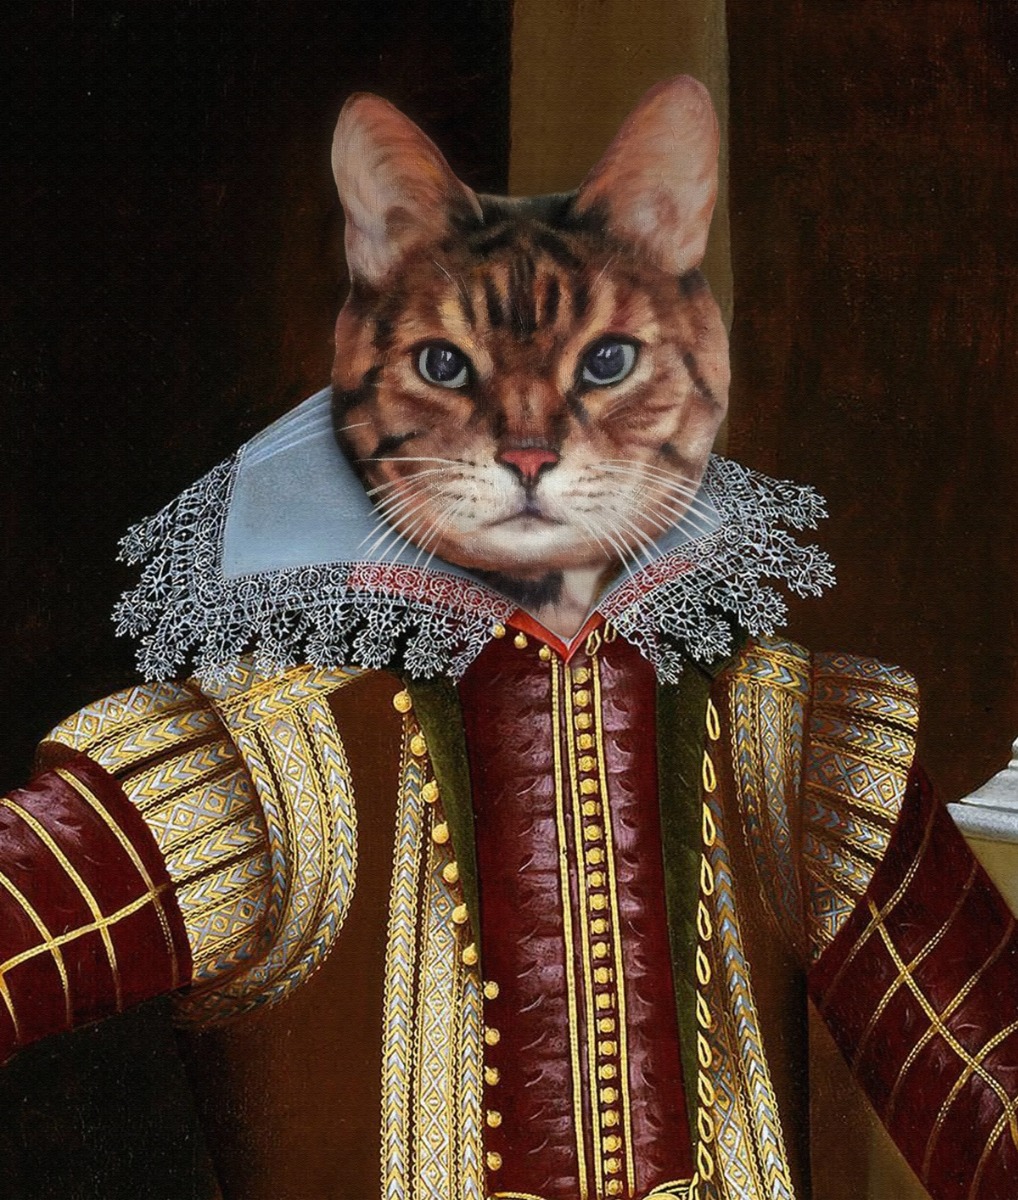 A fine brush oil painting depicting a cat in a renaissance costume.